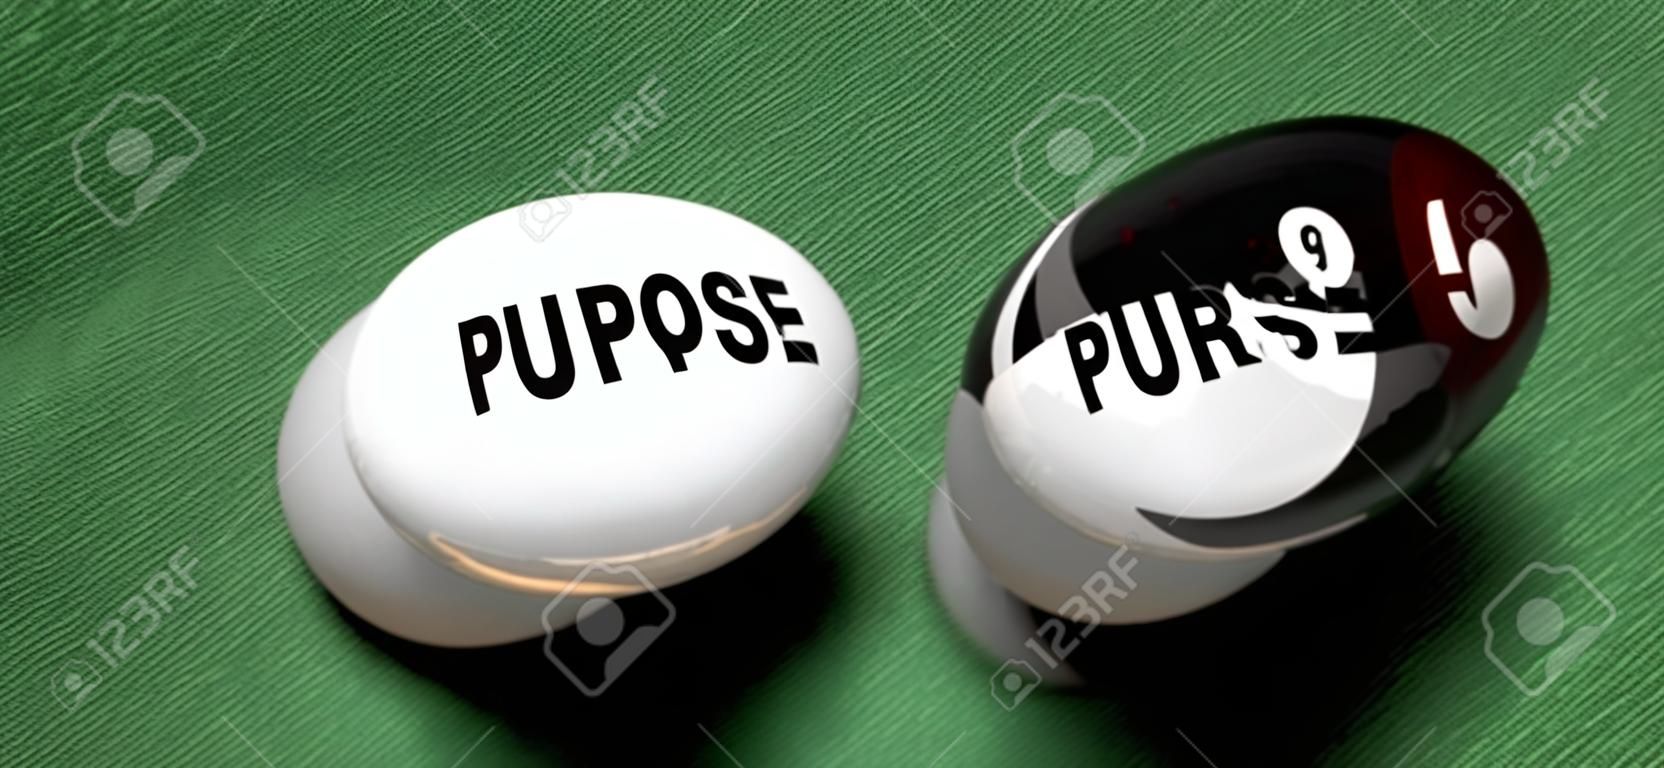 Purpose brings success - pictured as word Purpose on a pool ball, to symbolize that Purpose can initiate success, 3d illustration